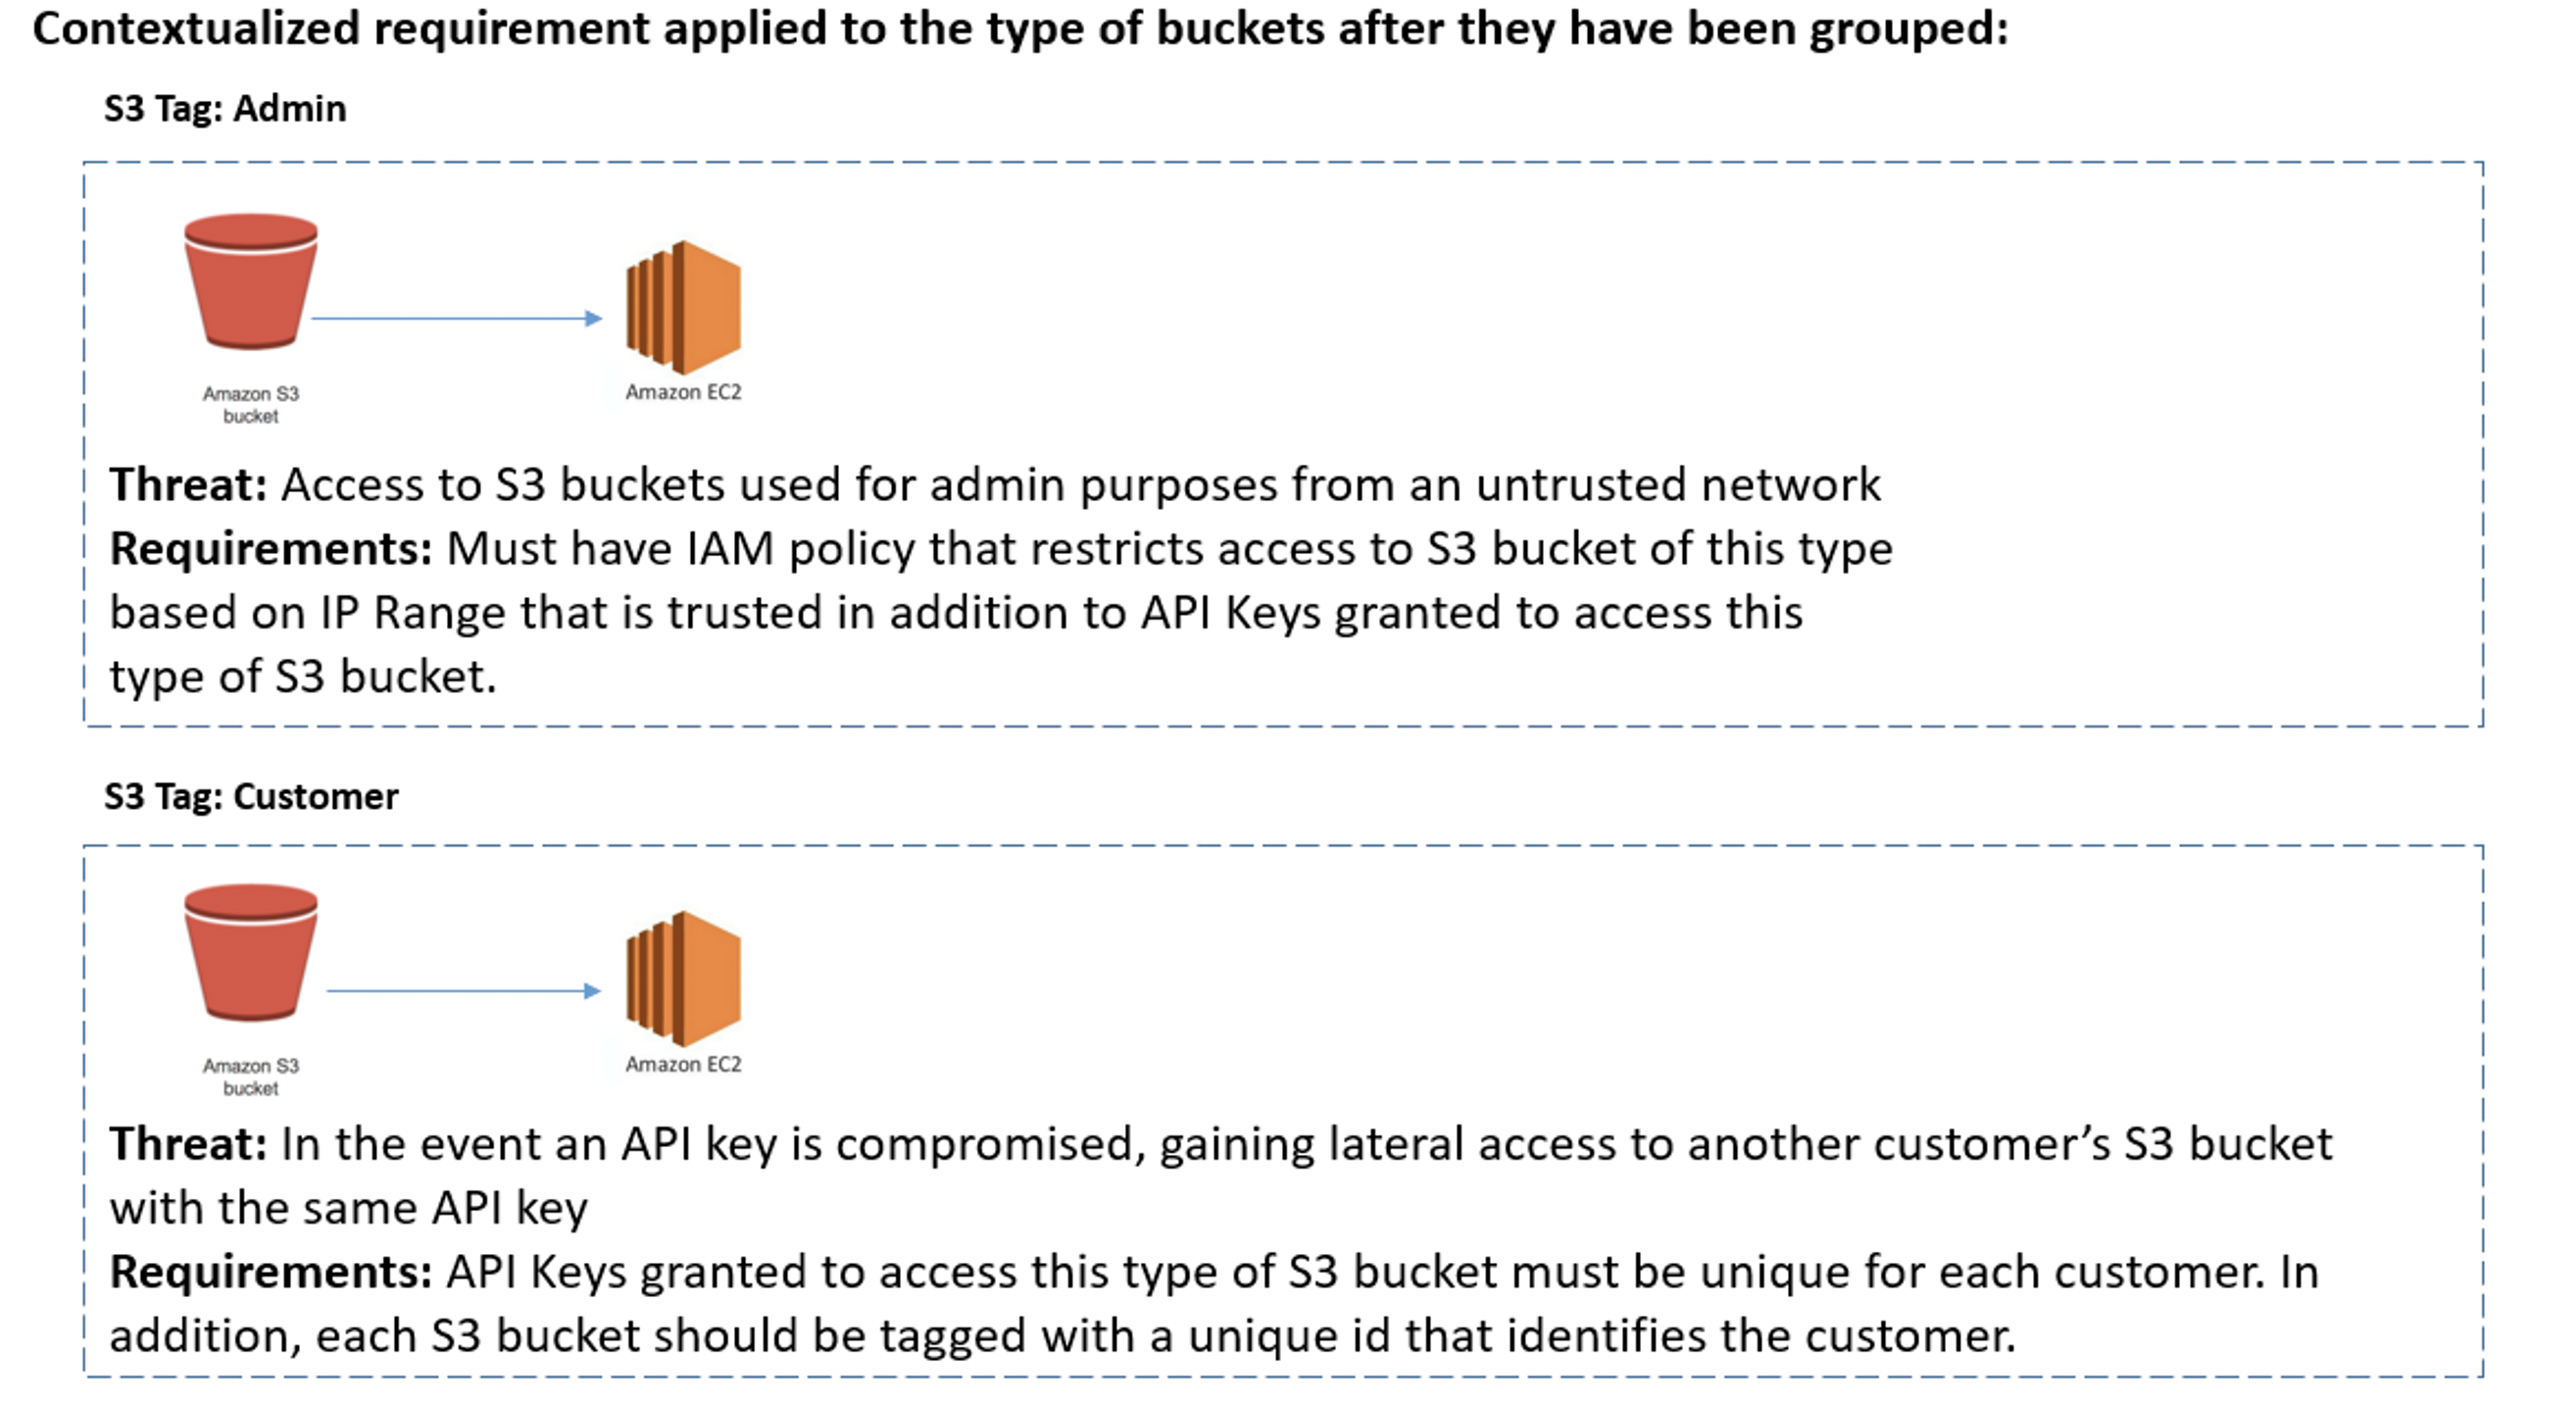 Figure 3. Contextualized requirement applied to the type of buckets after they have been grouped